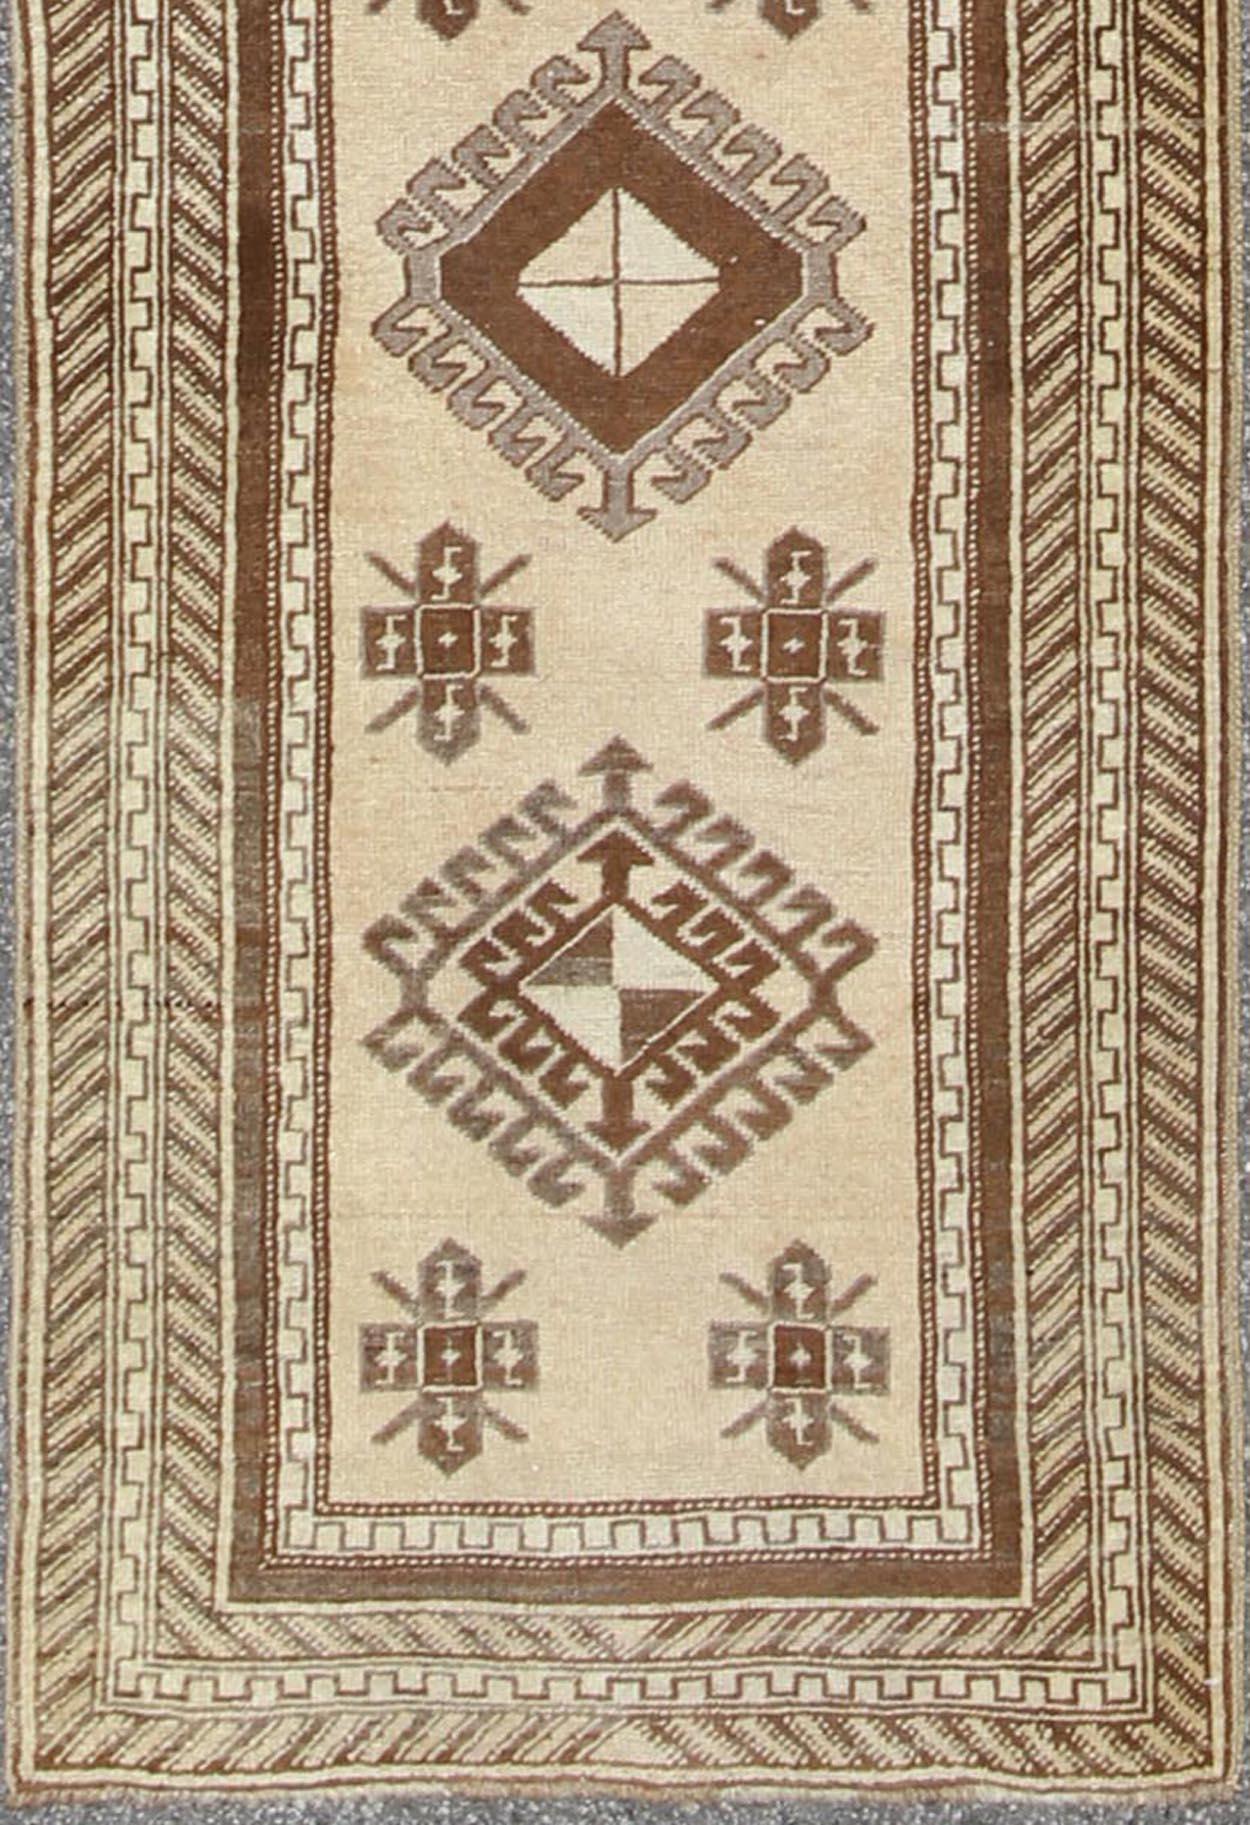 Light camel, brown, and taupe Oushak runner from Turkey with tribal geometric design, Keivan Woven Arts rug #TRA-180401, country of origin / type: Turkey / Oushak, circa 1940.
Measures: 2'8 x 12'10.

This long and narrow vintage Turkish gallery rug